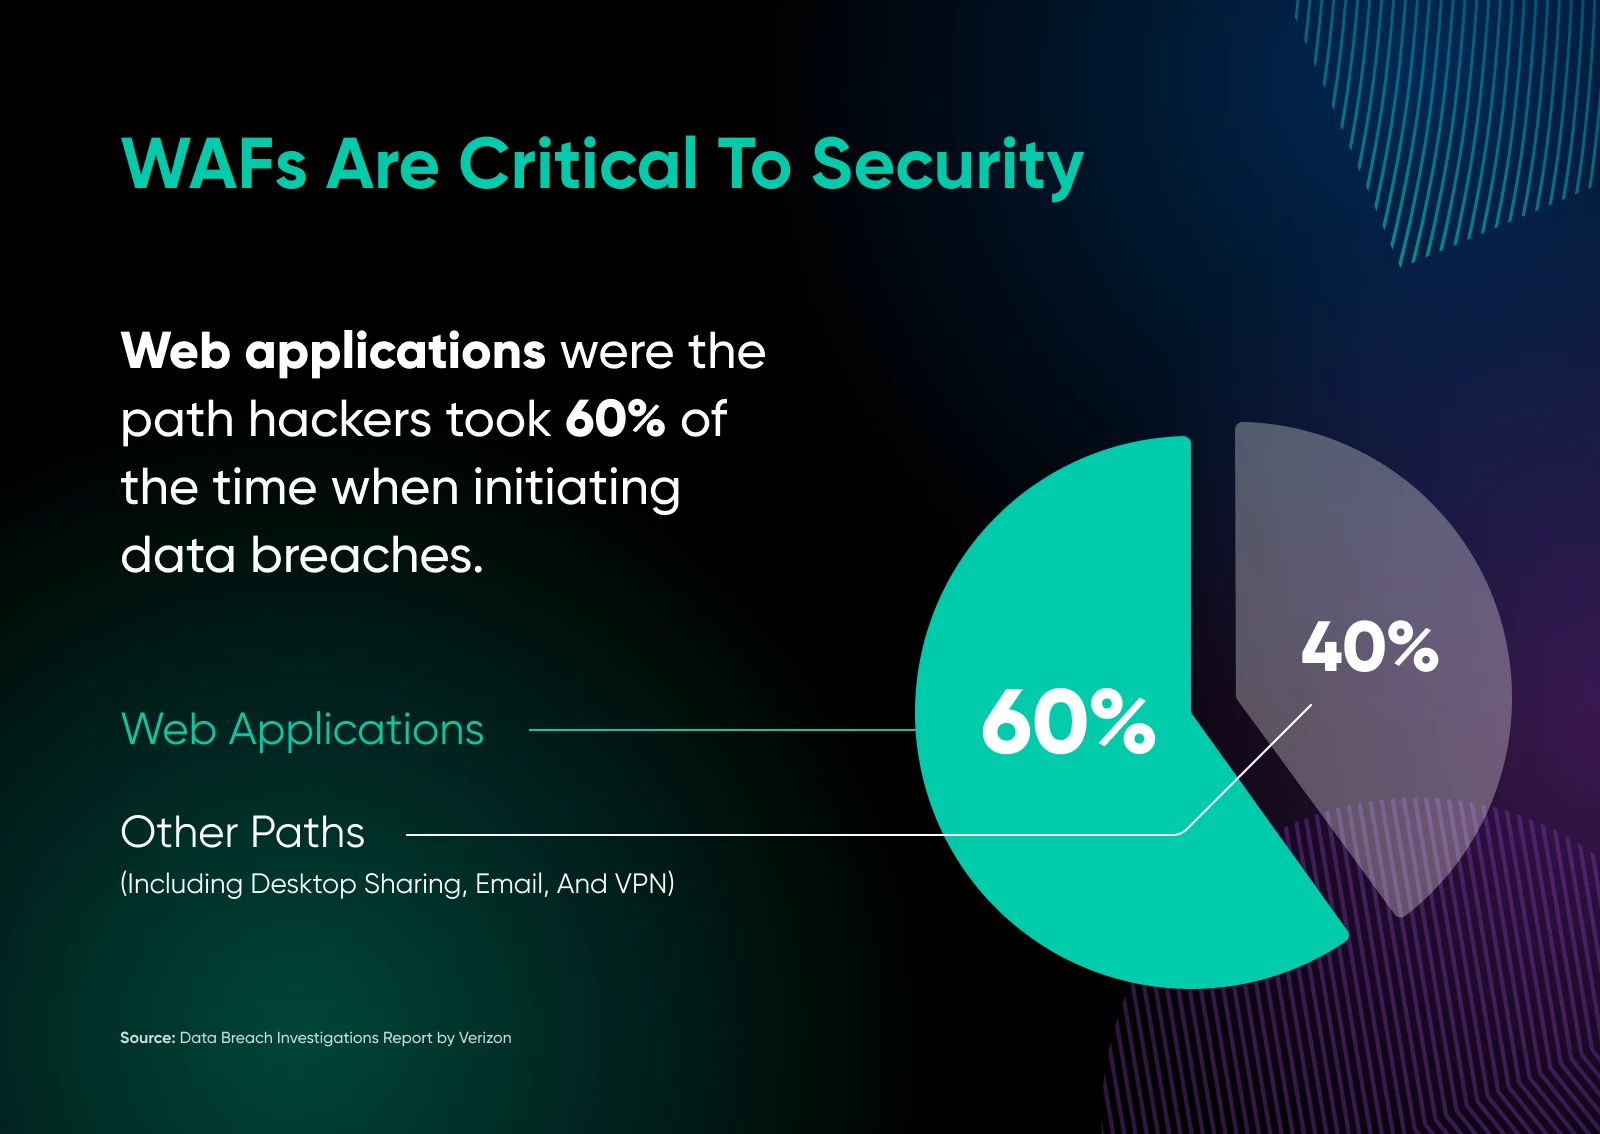 A pie chart shows why WAFs are critical to security. Hackers breach data through web apps 60% of the time.